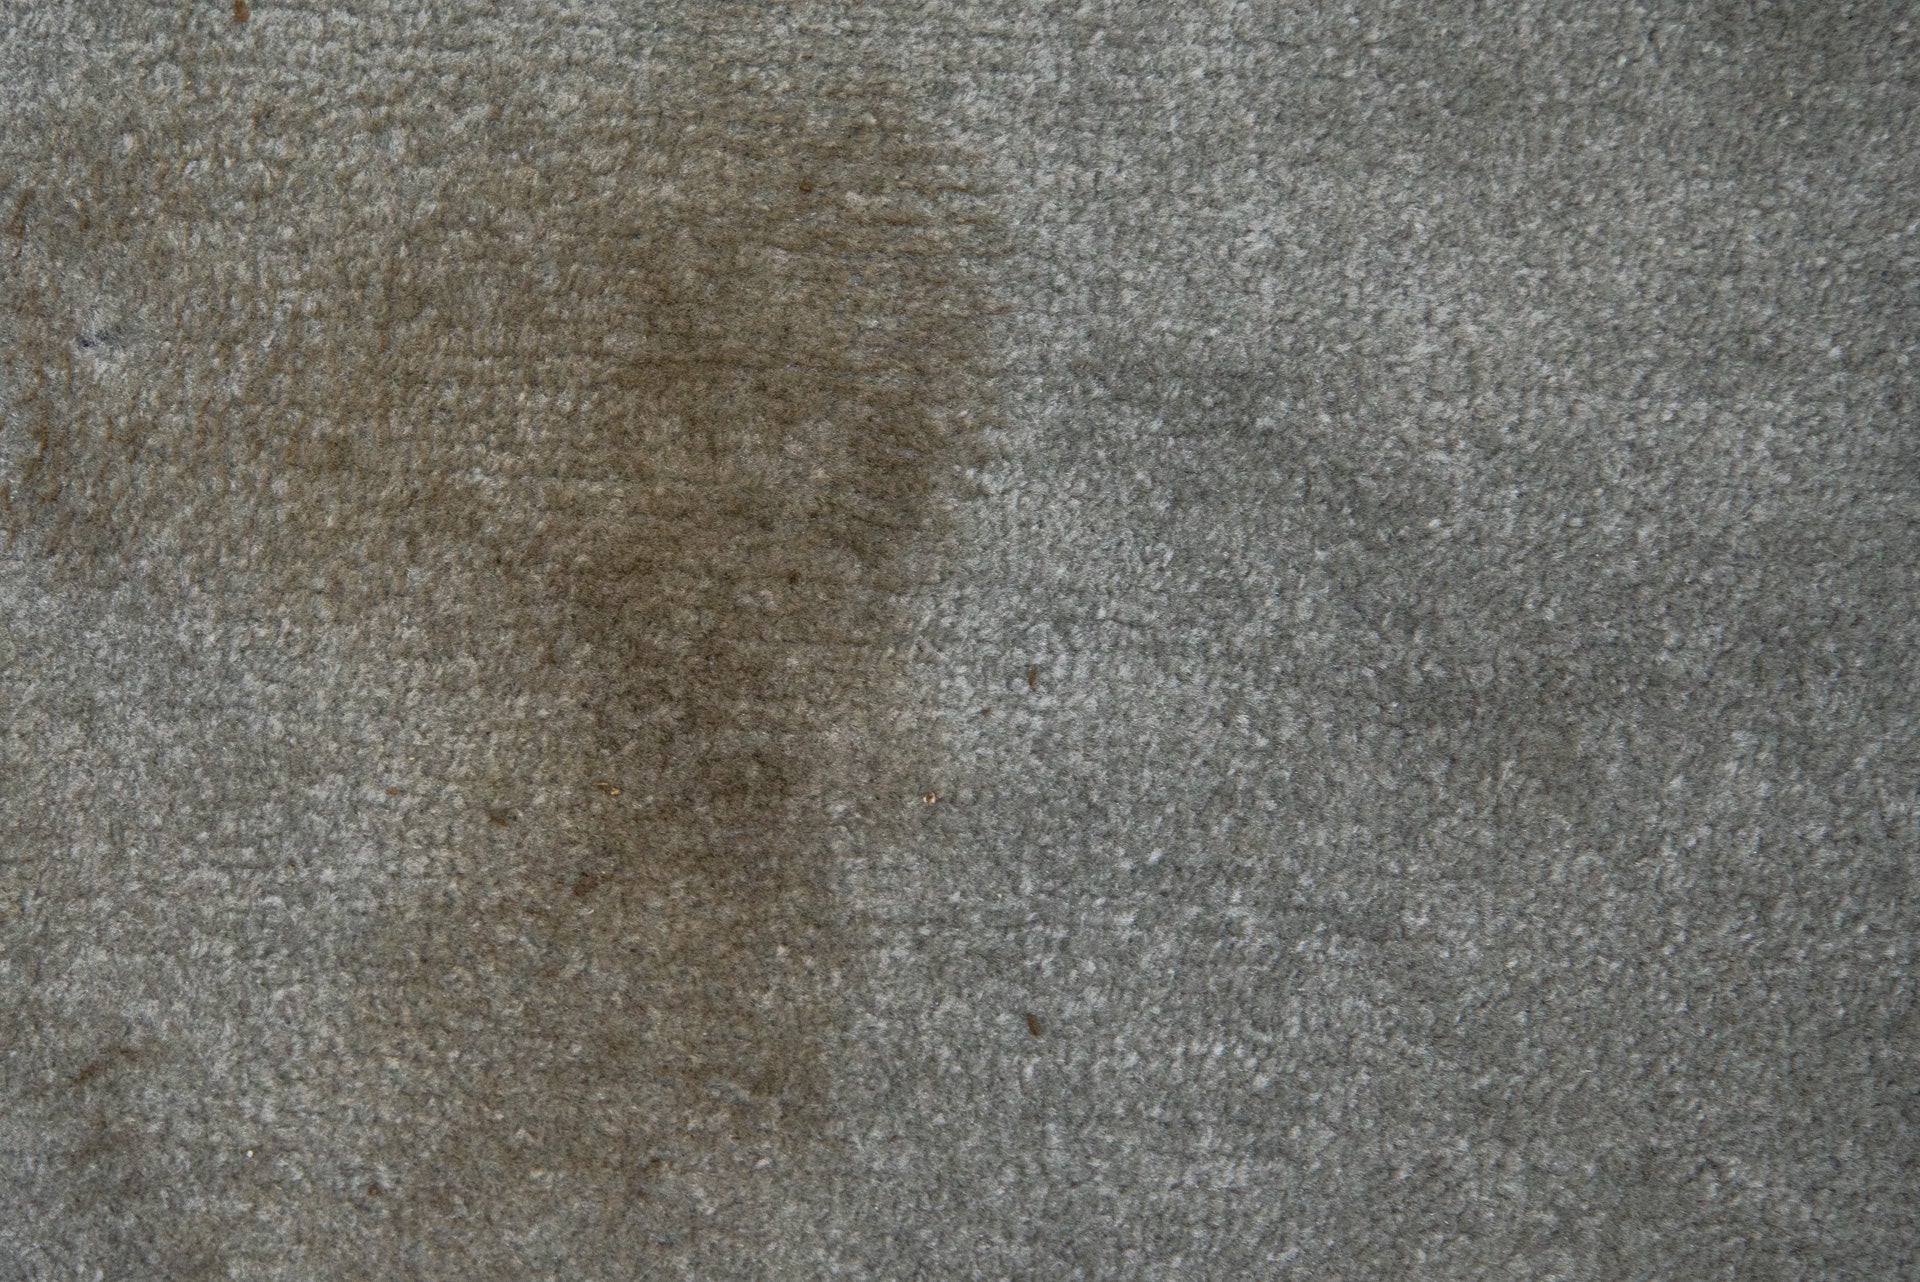 A mud stain on a carpet